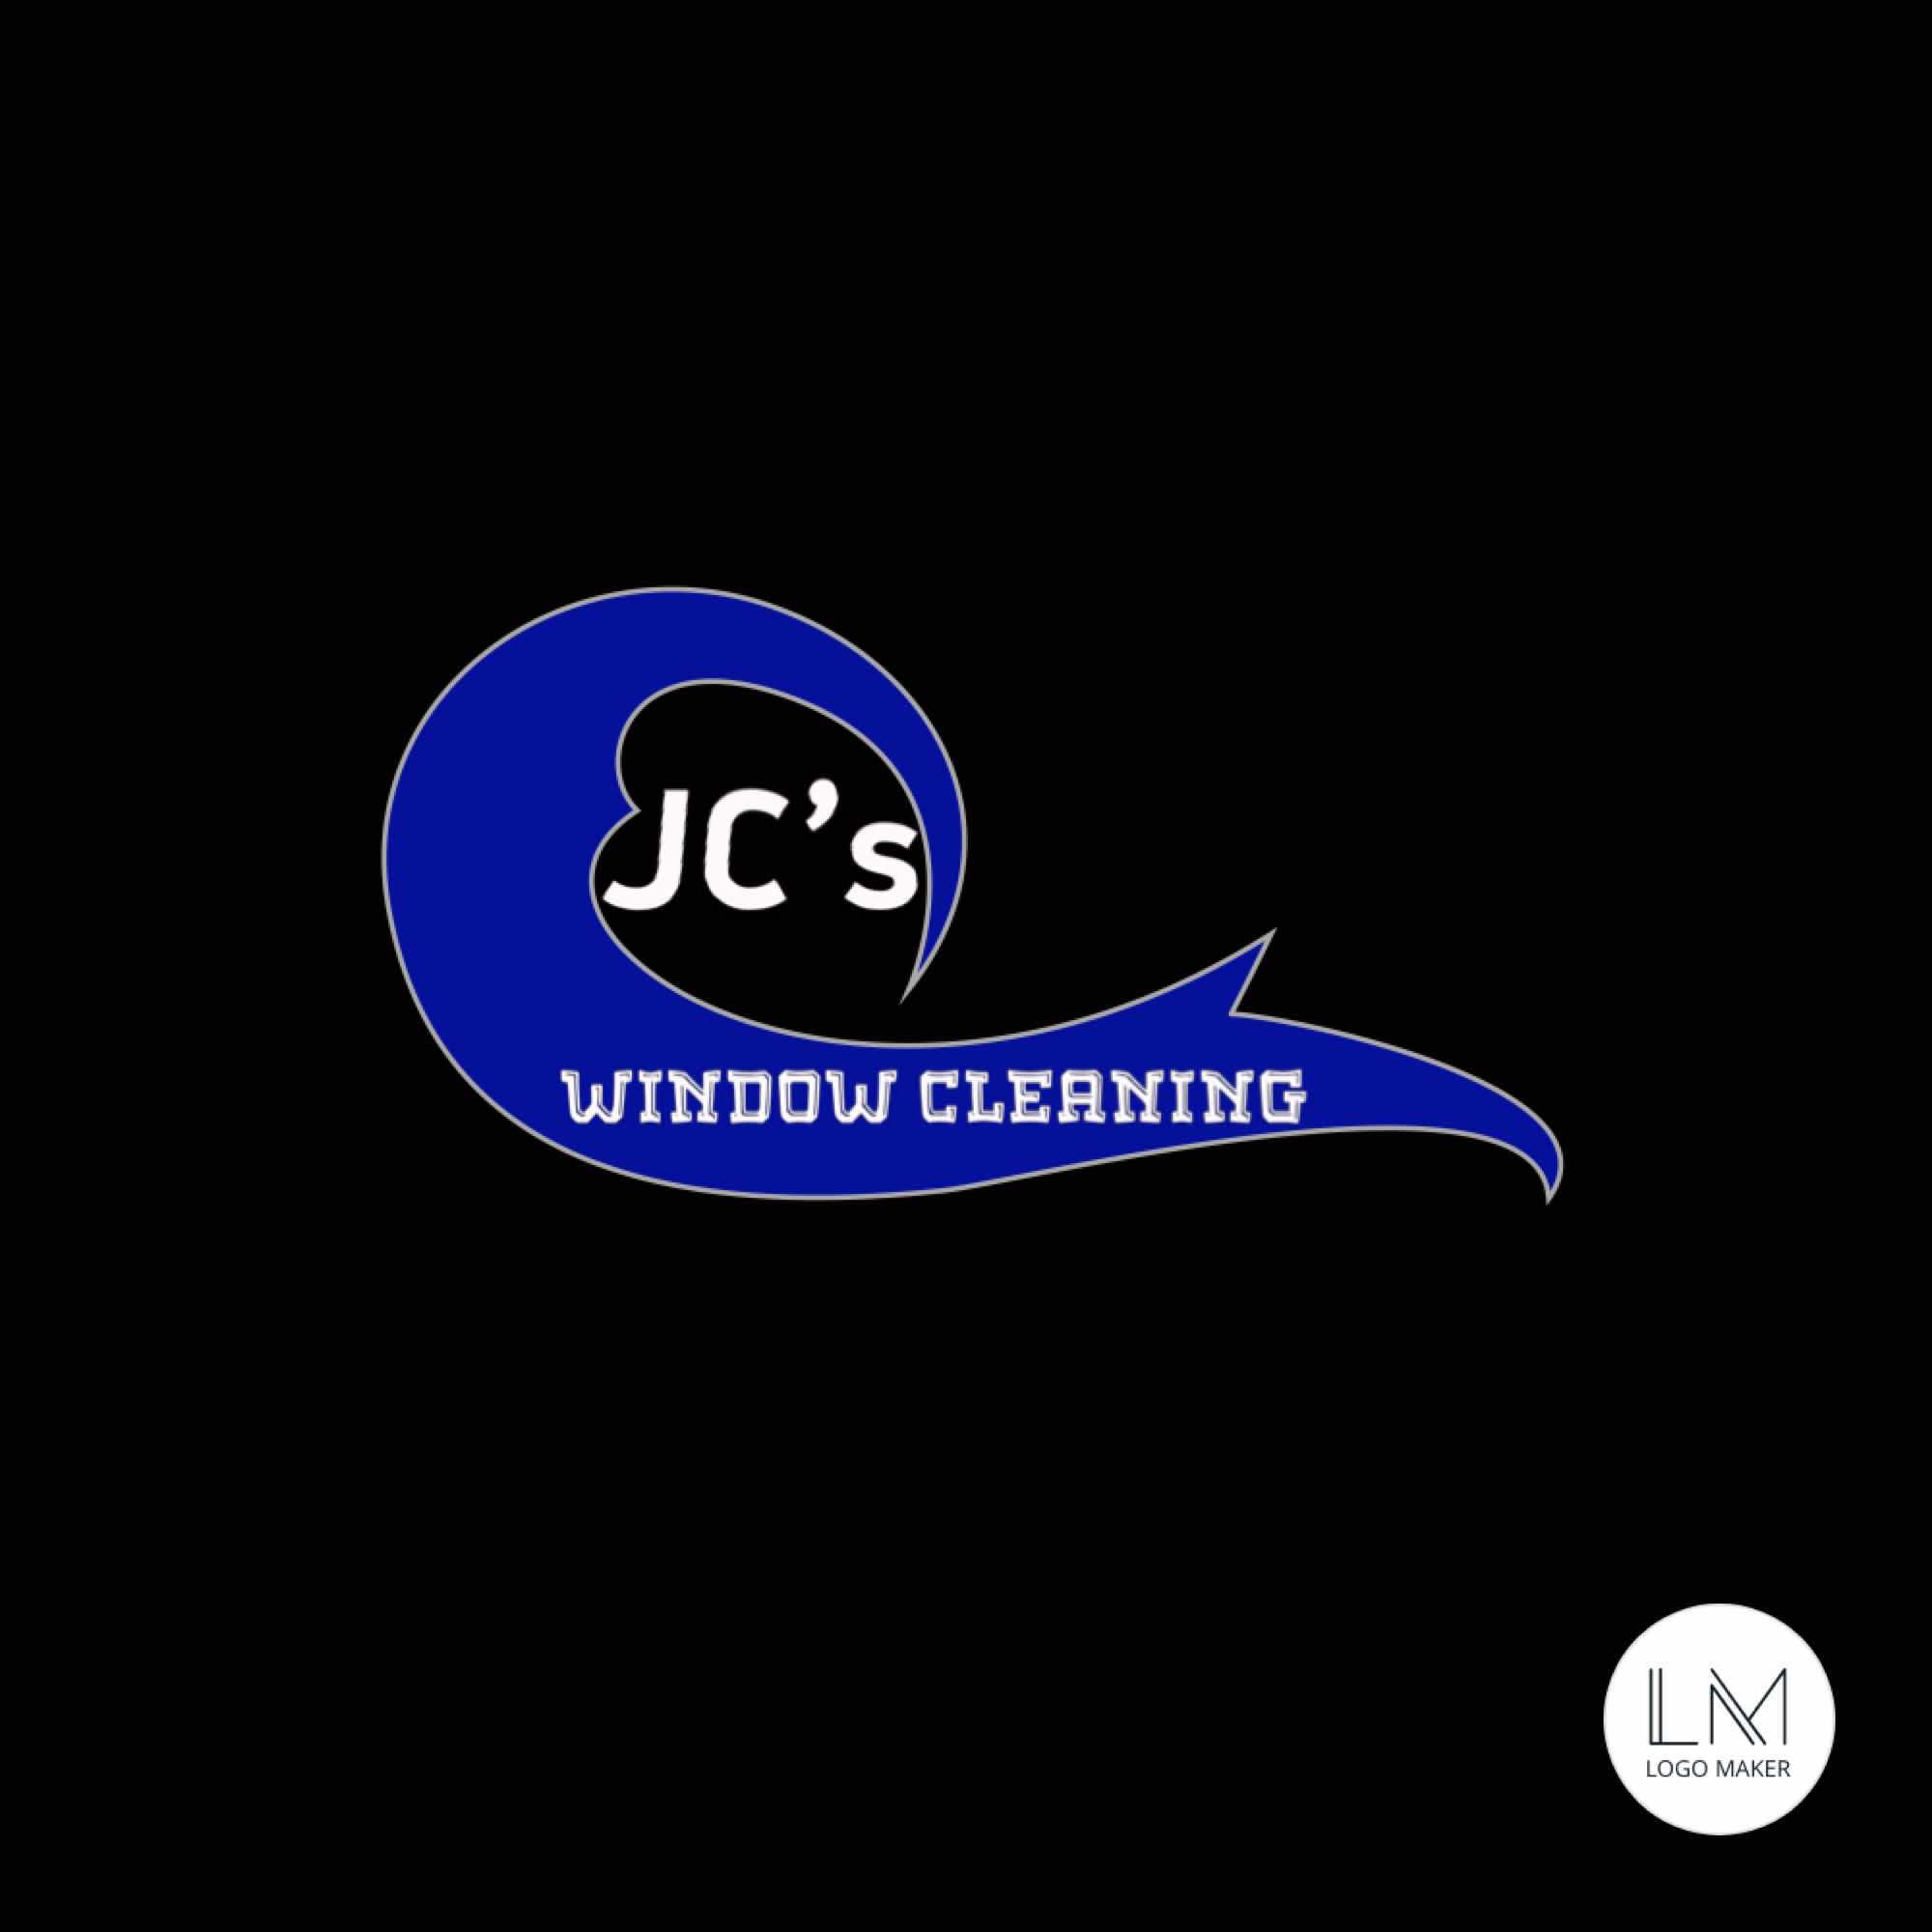 JC’s Window Cleaning Services